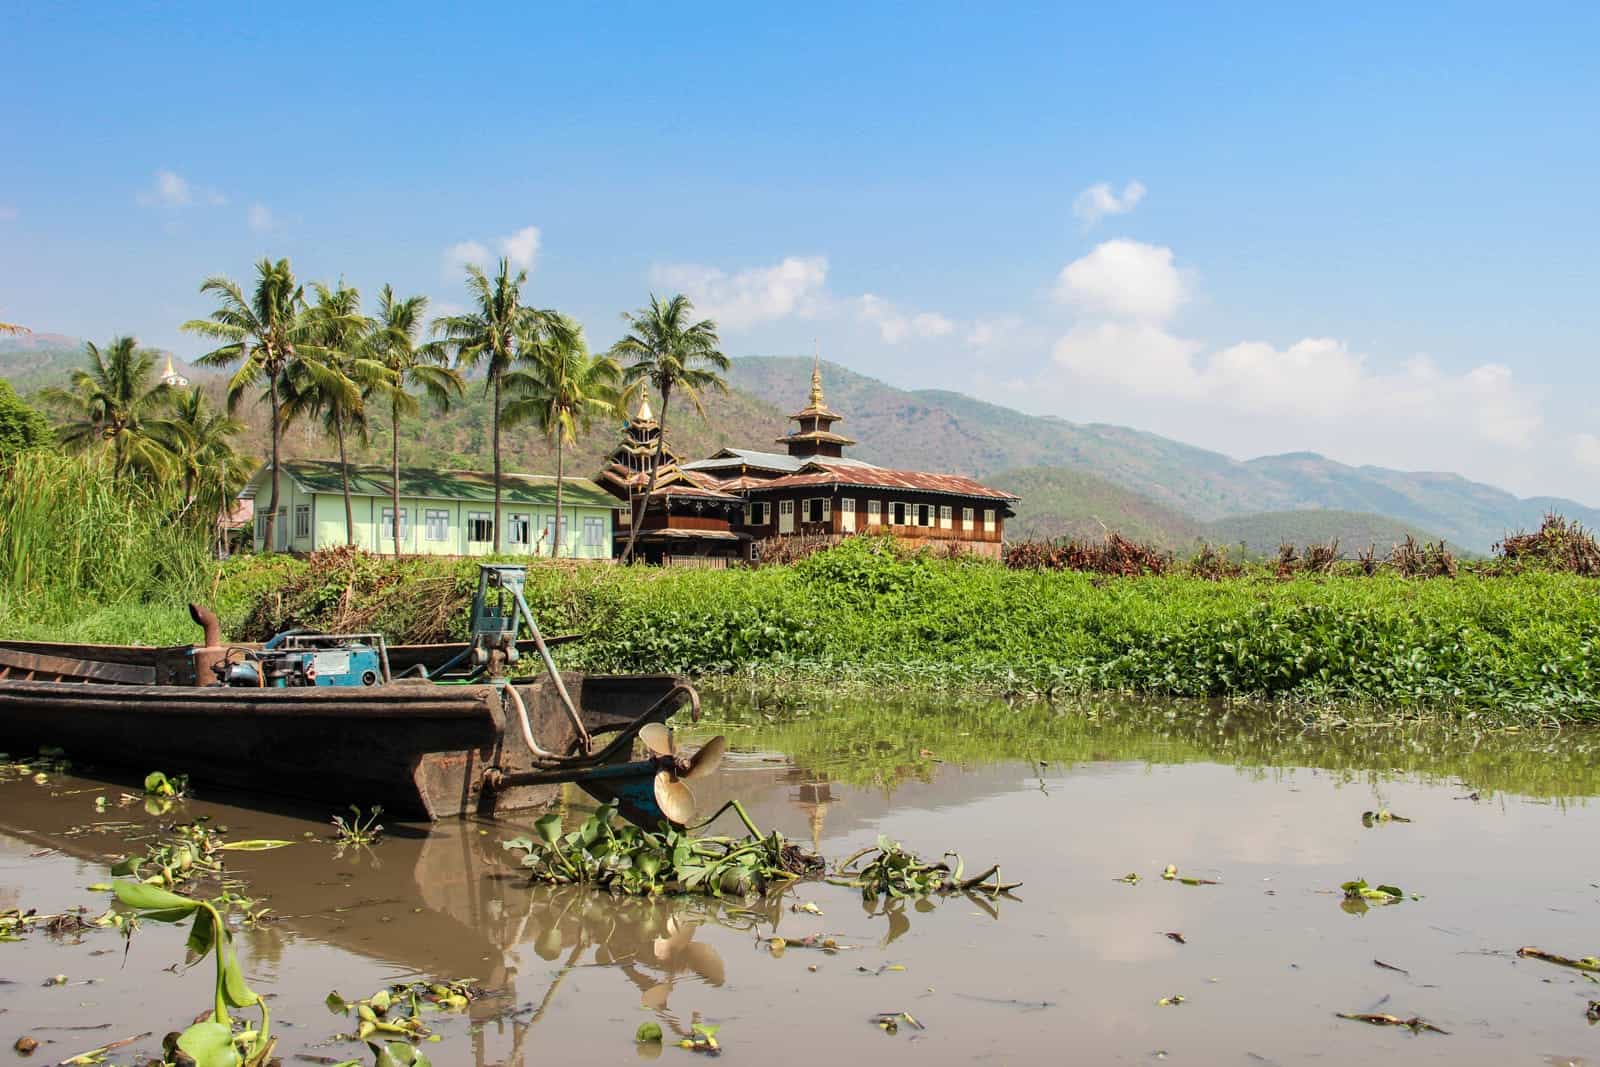 A rusting boat with a blue engine, sits in a pool of murky water, backed by green water plants. In the far distance is a red temple with a golden pagoda in the countryside of Myanmar, next to a mint green building and a row of six palm trees. 